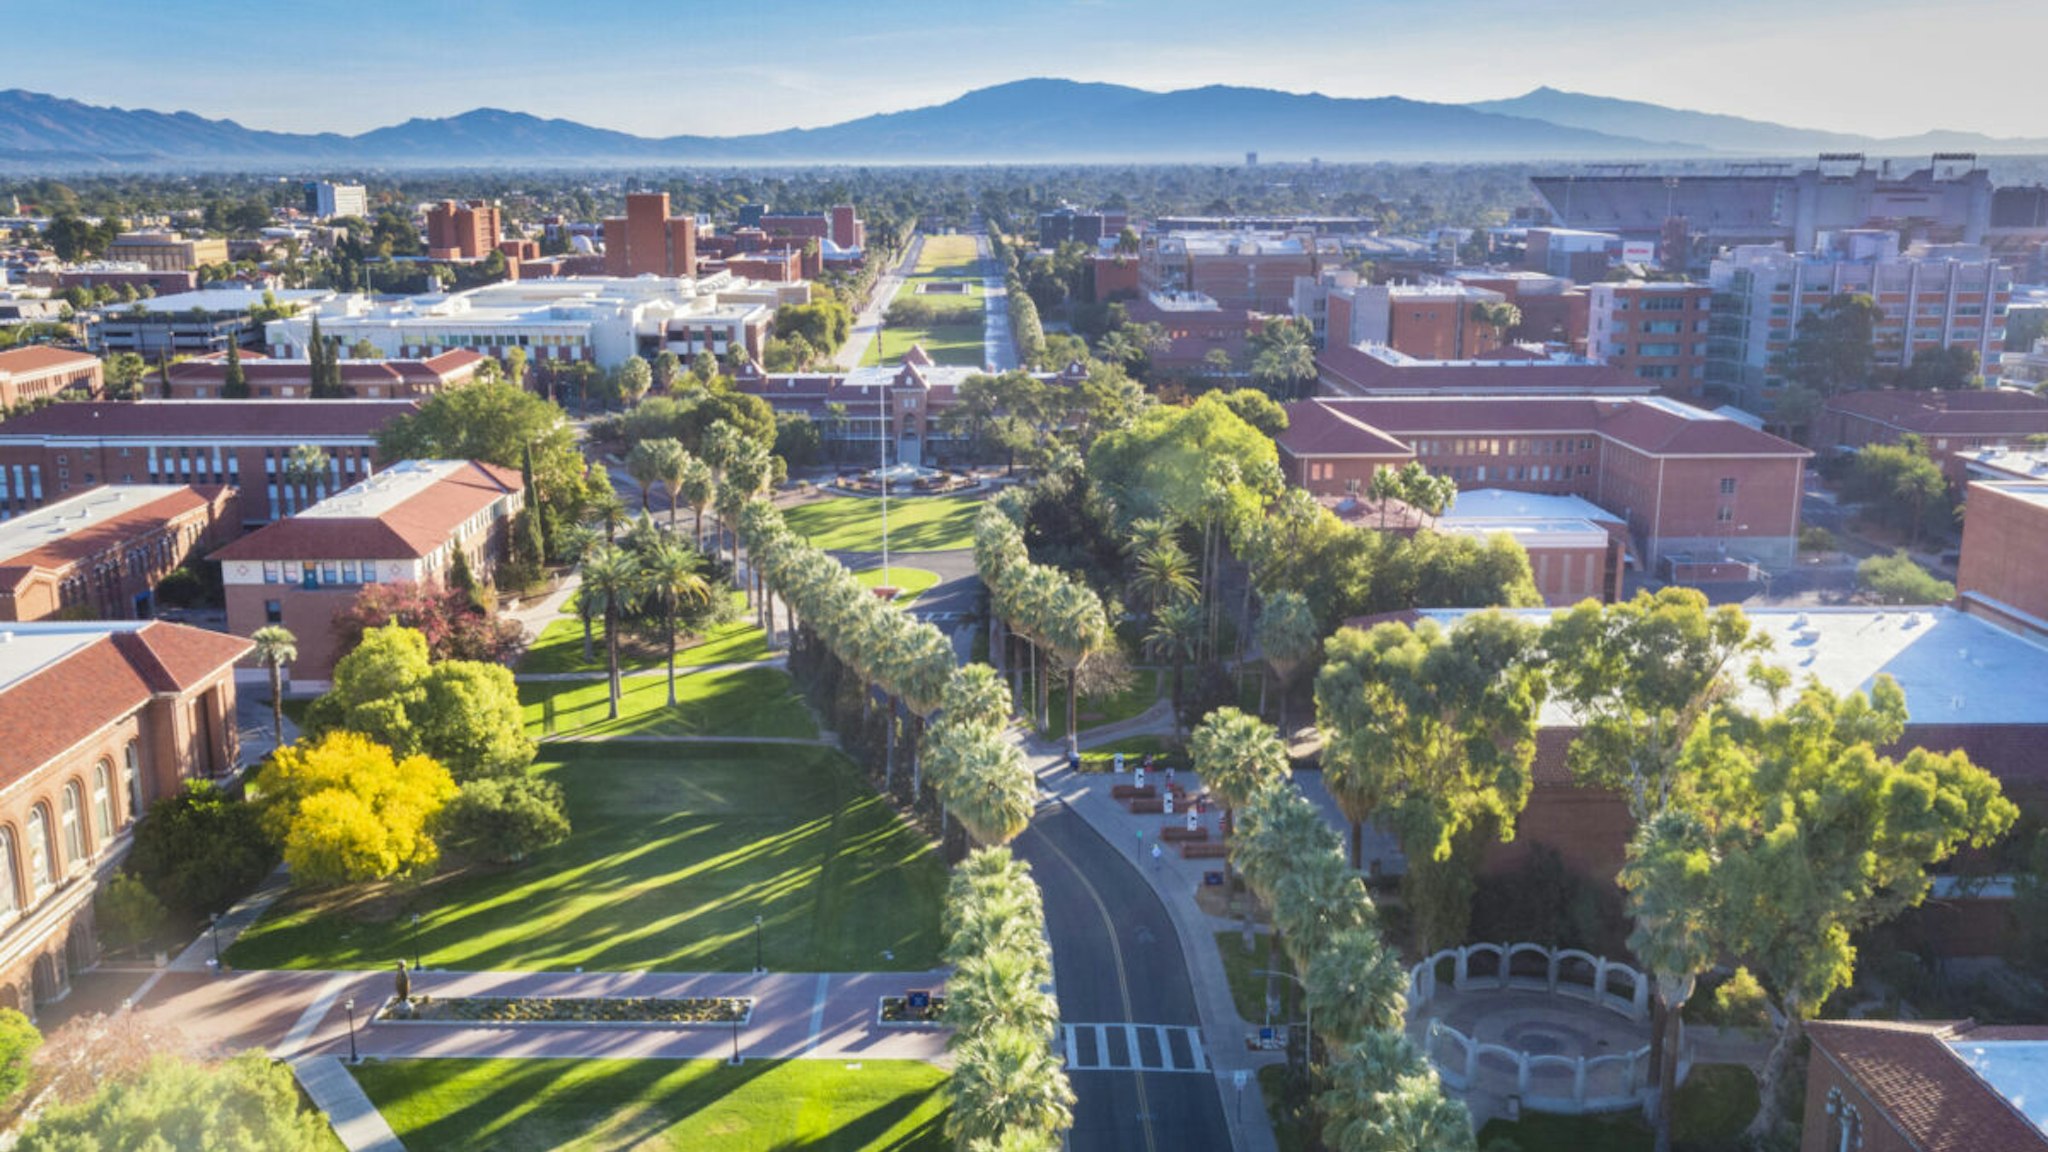 Aerial View of the University of Arizona, U of A